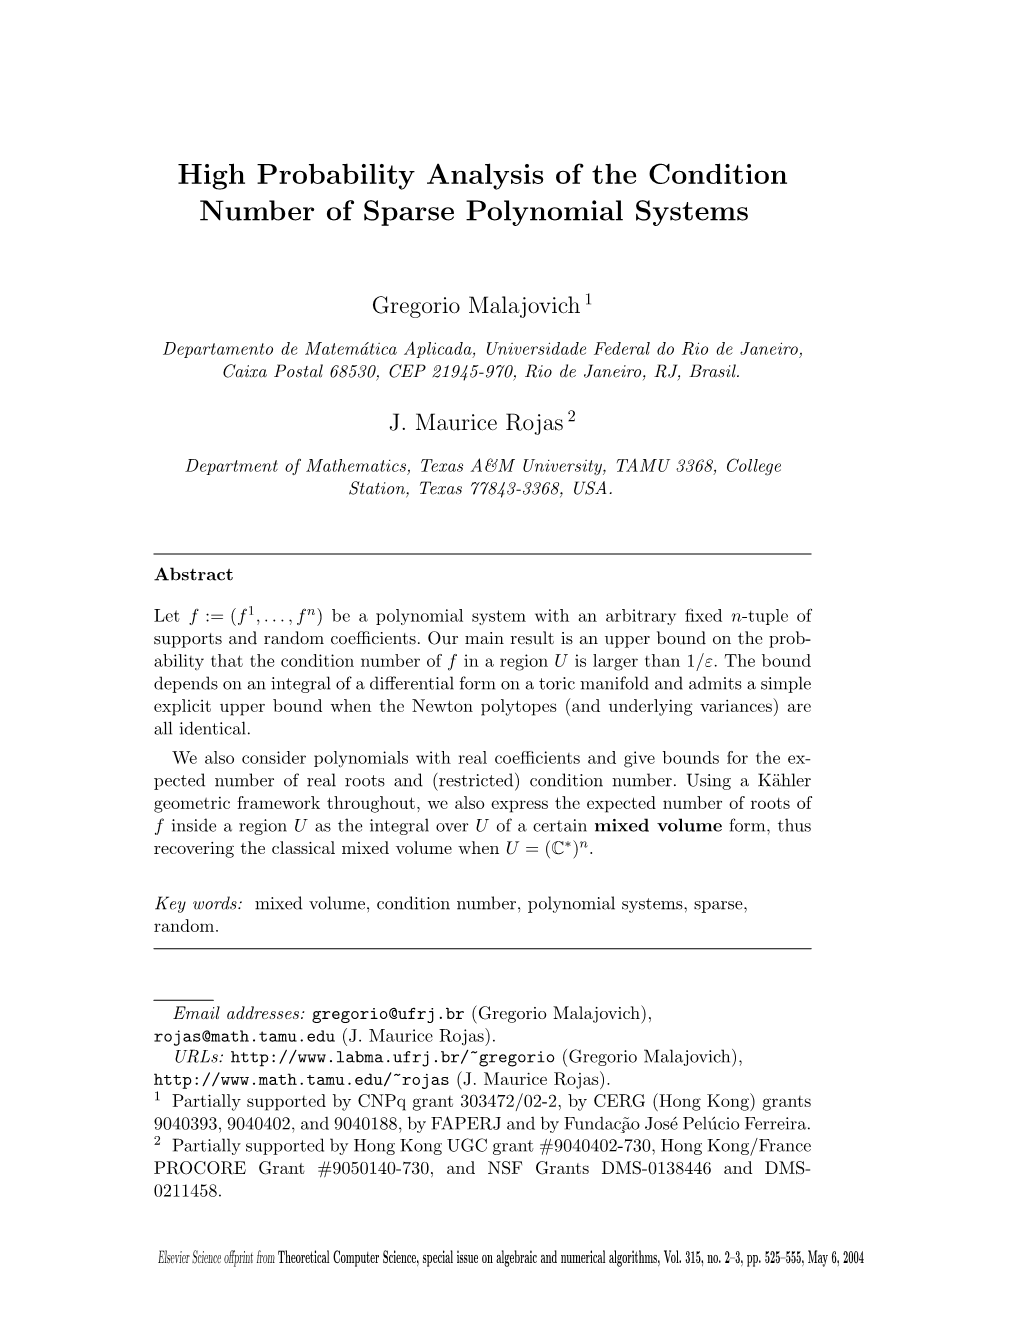 High Probability Analysis of the Condition Number of Sparse Polynomial Systems